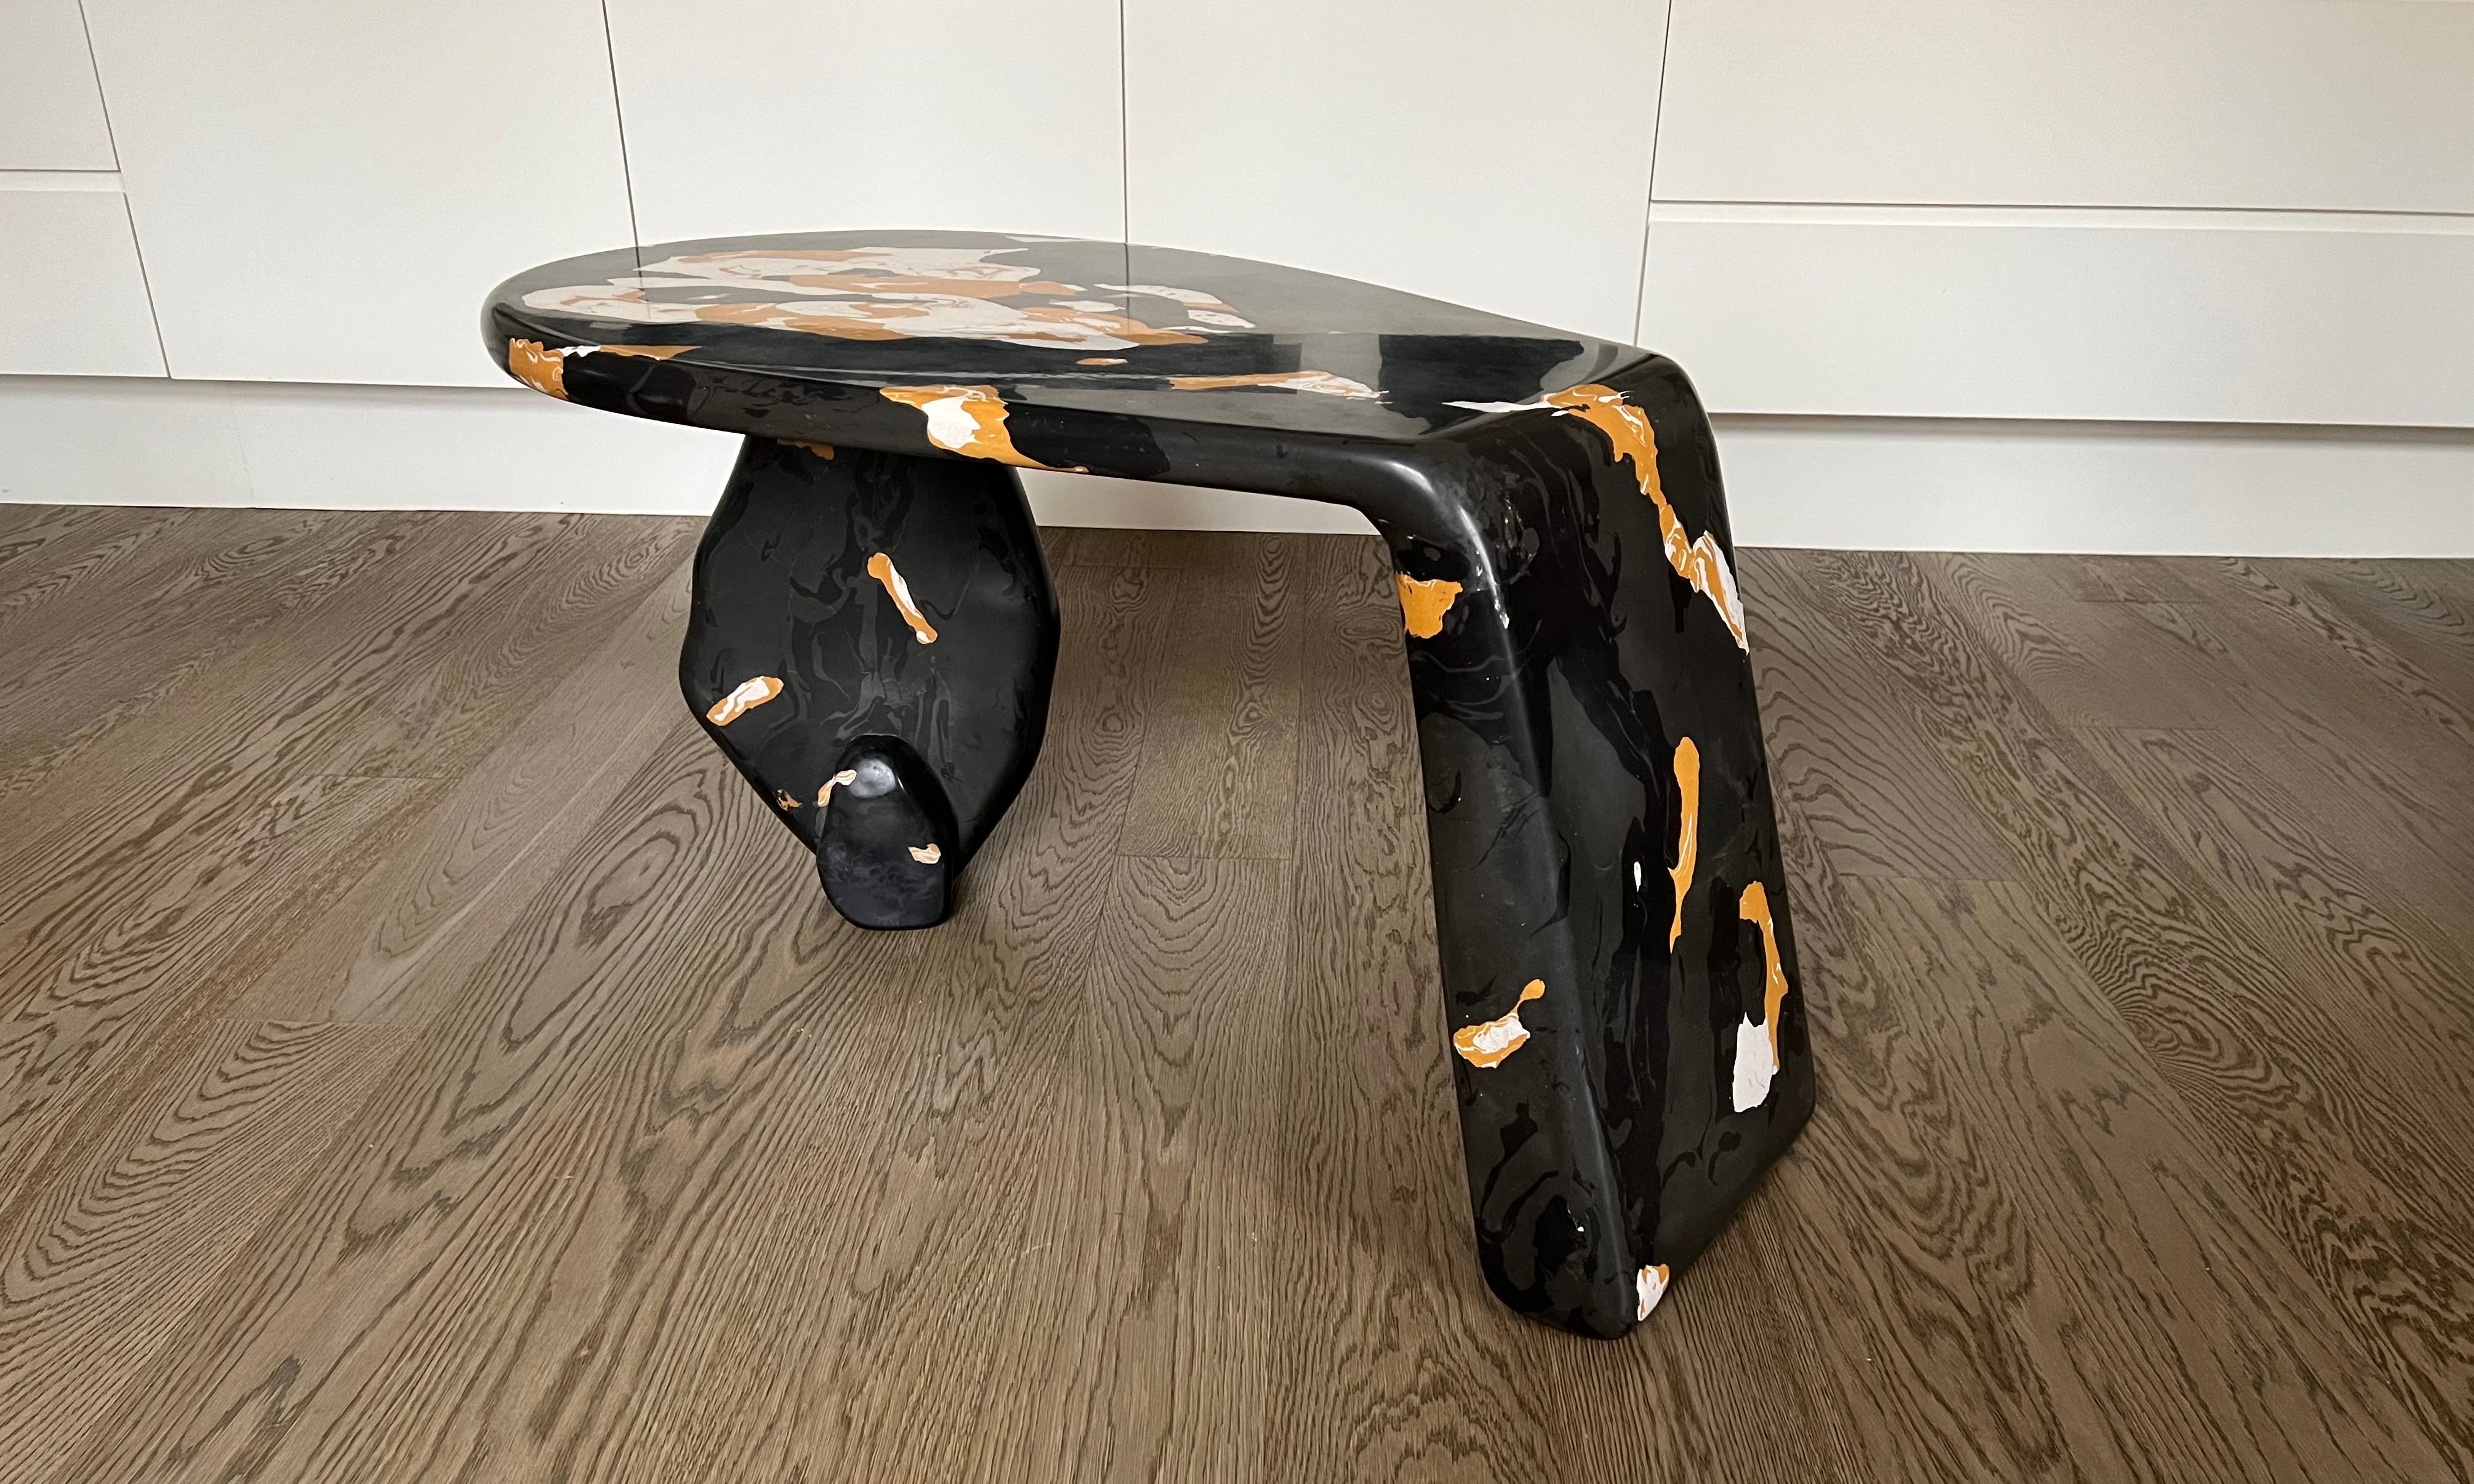 One of kind medium size coffee table, beautifully handcrafted in stucco marmo, a lengthy, laborious 15th century method that lends itself well to modern design. Inspired by the Japanese Urushi craft, the table displays striking colours of natural